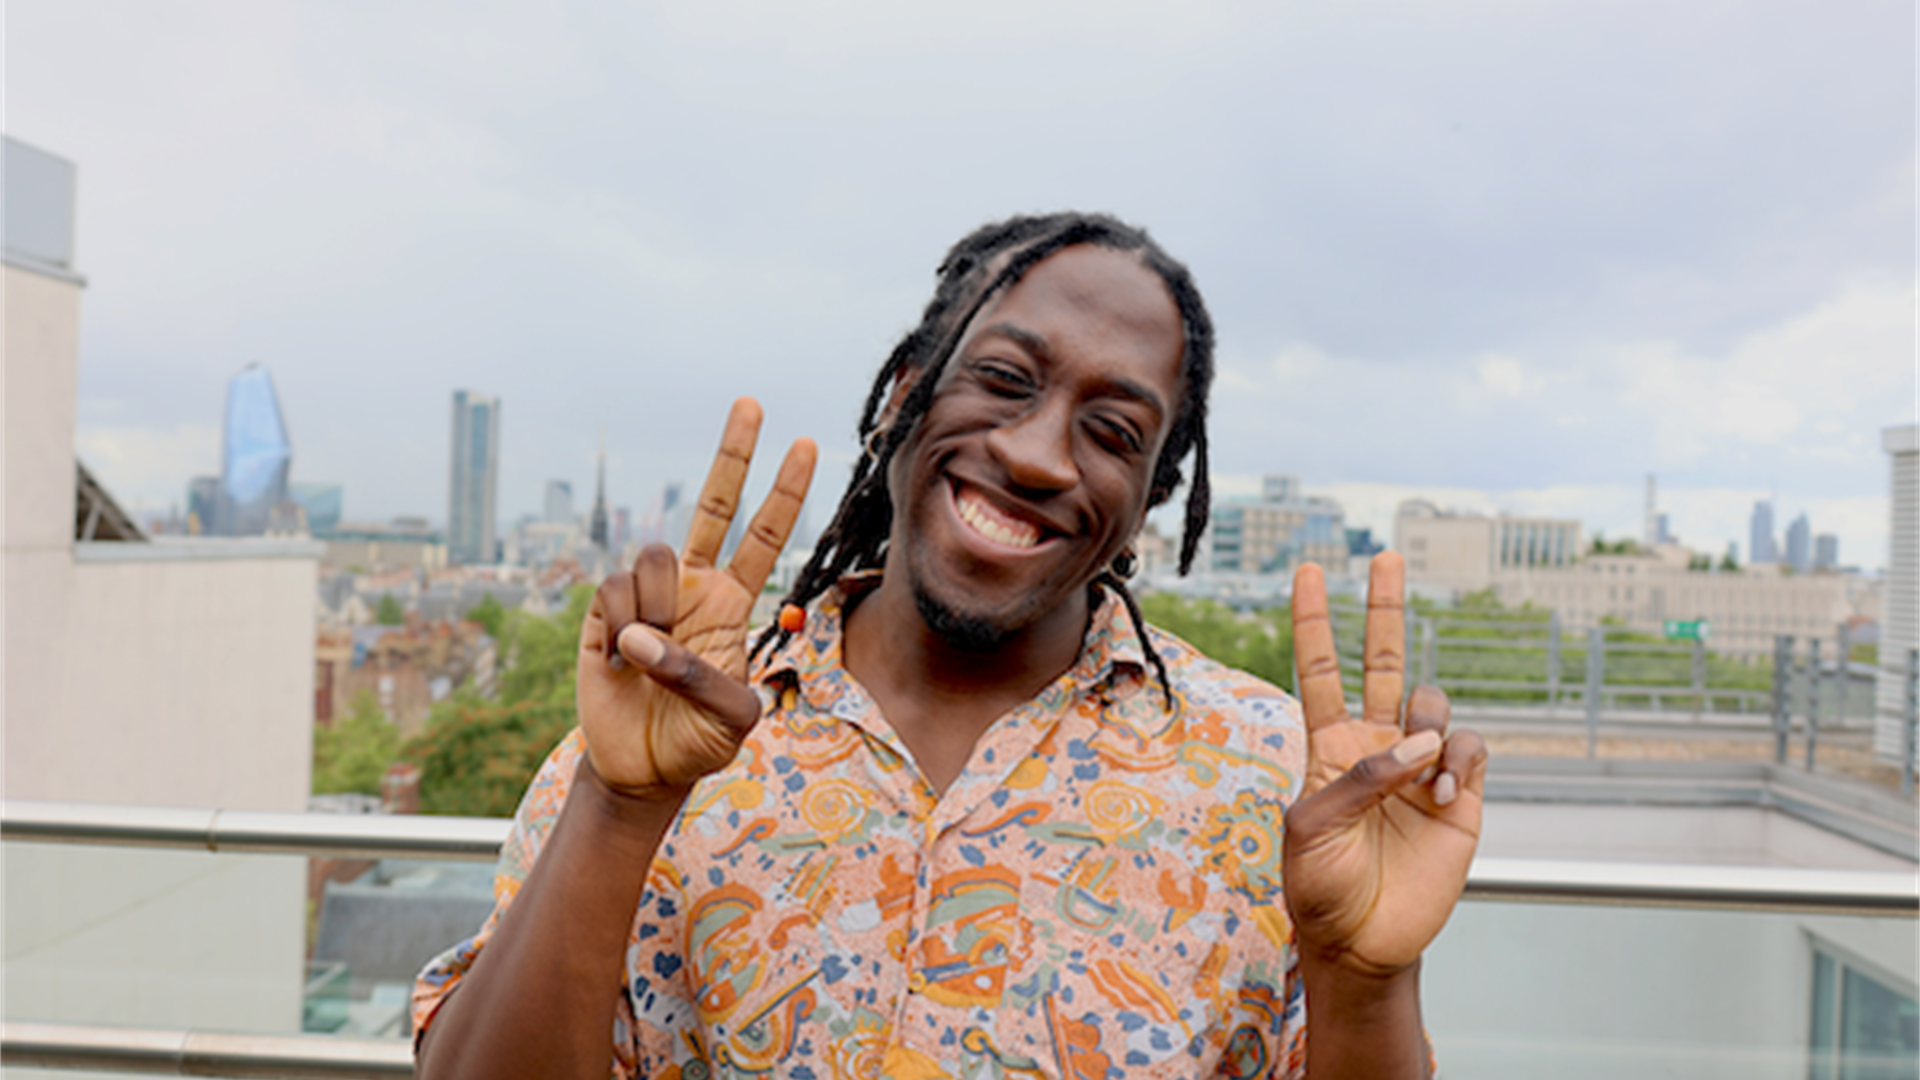 A person with dark brown dreadlocks, smiling holding up two "peace" signs with their hands. They're wearing a multicoloured short sleeved shirt.